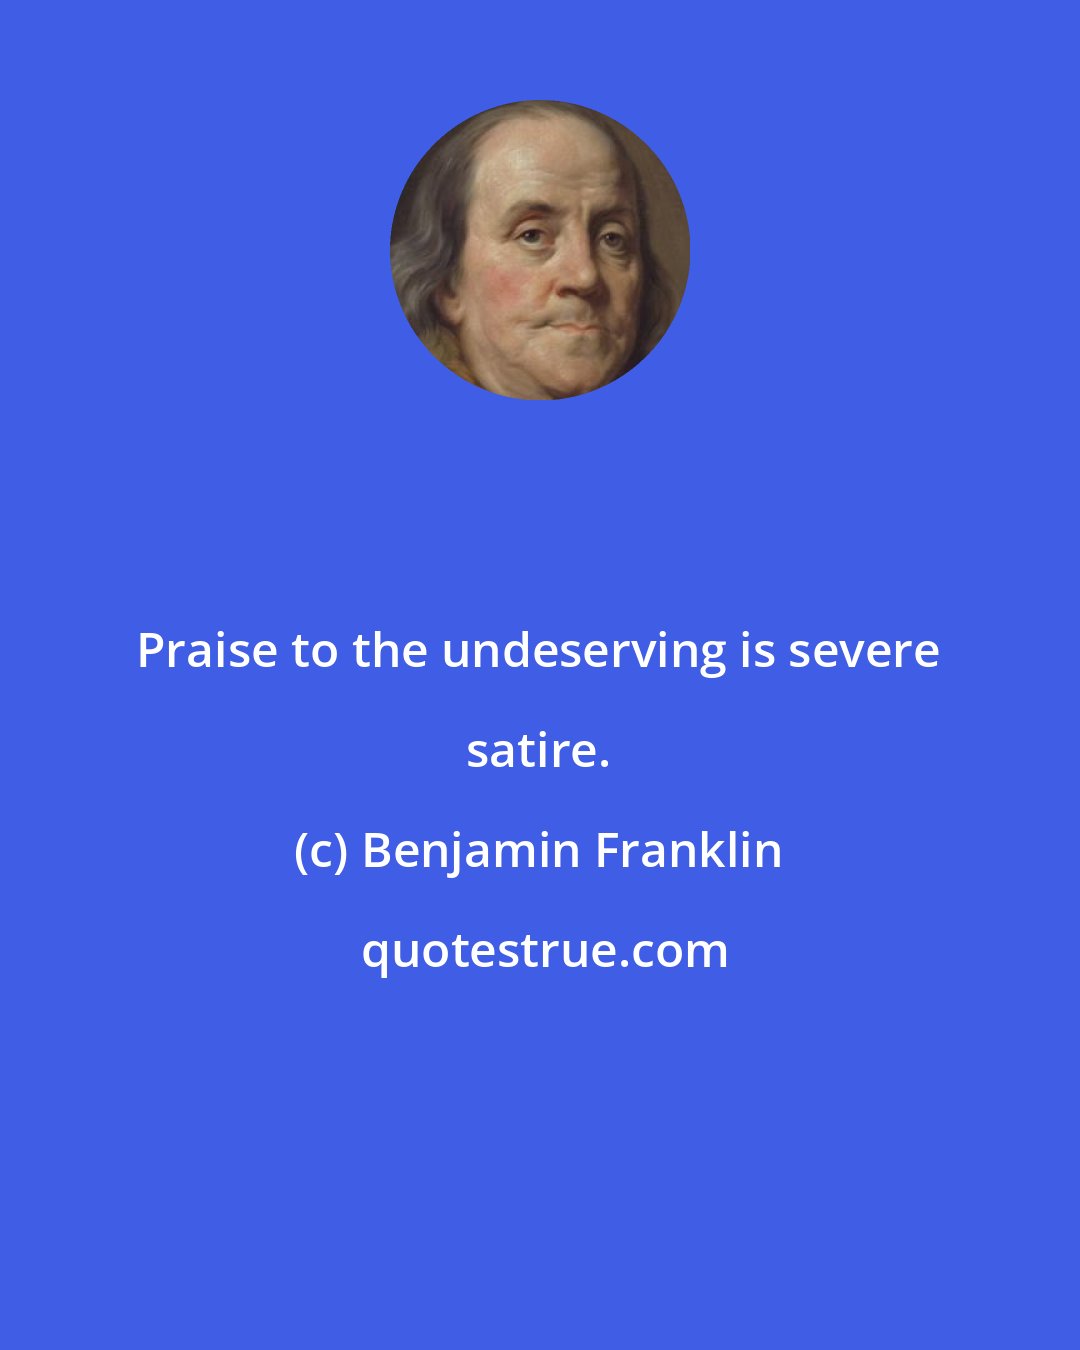 Benjamin Franklin: Praise to the undeserving is severe satire.